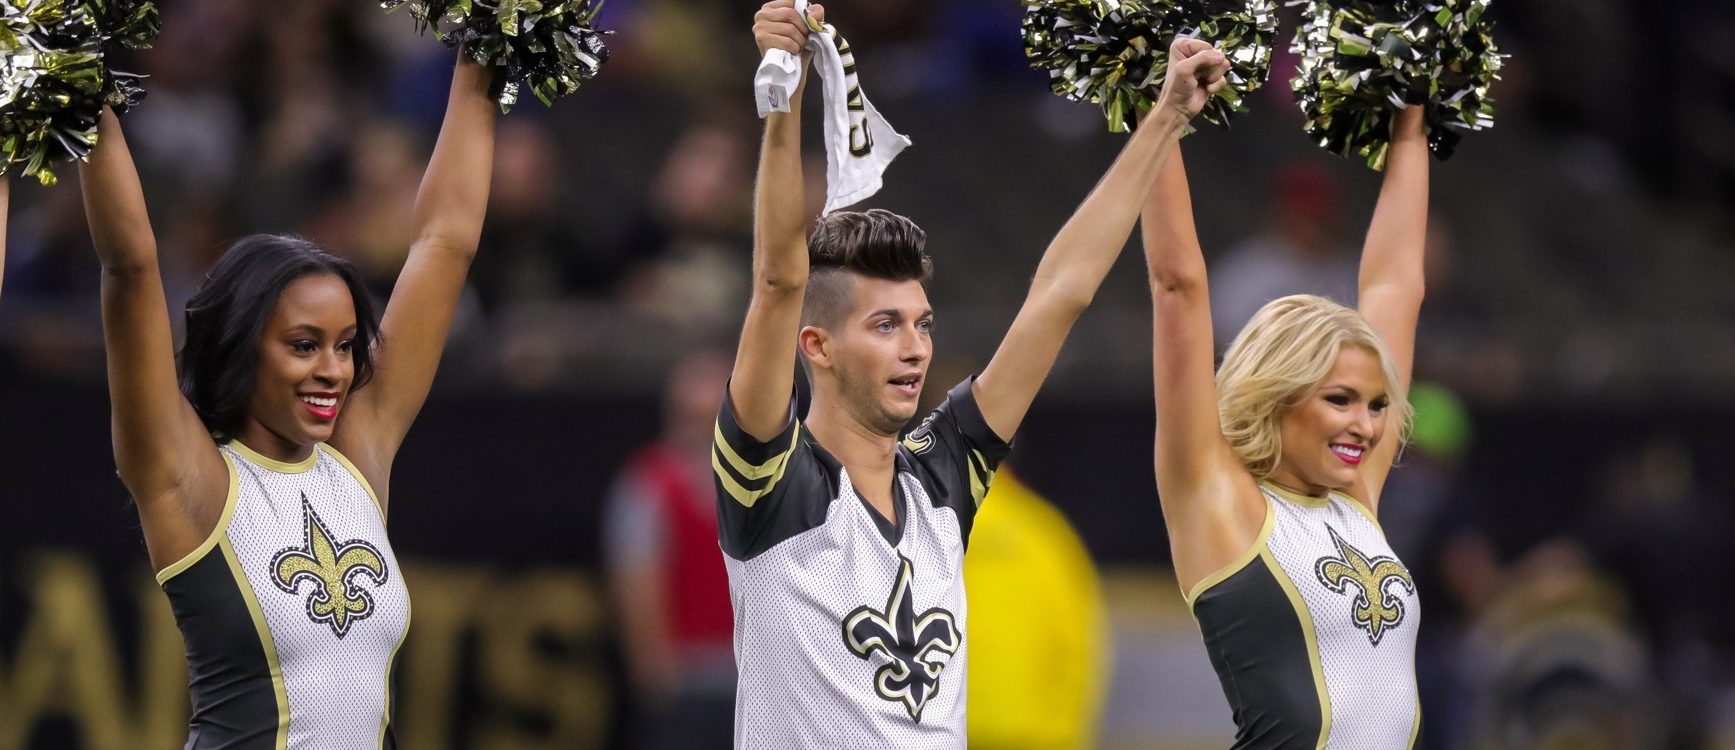 New Orleans Saints Saintsation first male Saintsation Jesse Hernandez in an NFL preseason football game between the New Orleans Saints and the Arizona Cardinals on August 17, 2018 at the Mercedes-Benz Superdome in New Orleans, LA.  (Photo by Stephen Lew/Icon Sportswire via Getty Images)